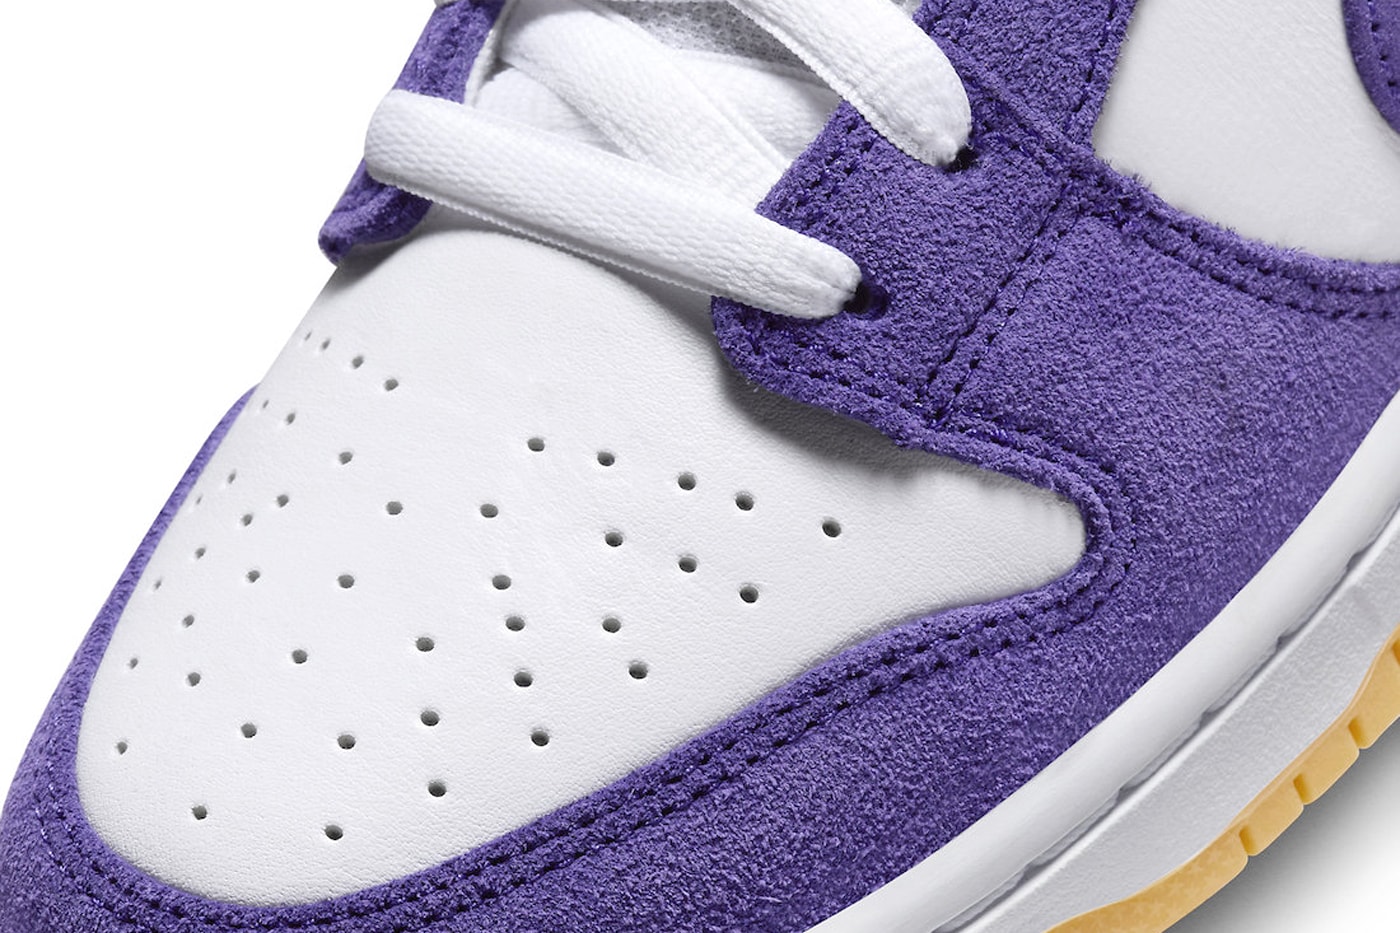 Official Look at the Nike SB Dunk Low "Court Purple" DV5464-500 Court Purple/Court Purple-White-Gum Light Brown low top los angeles lakers colors 